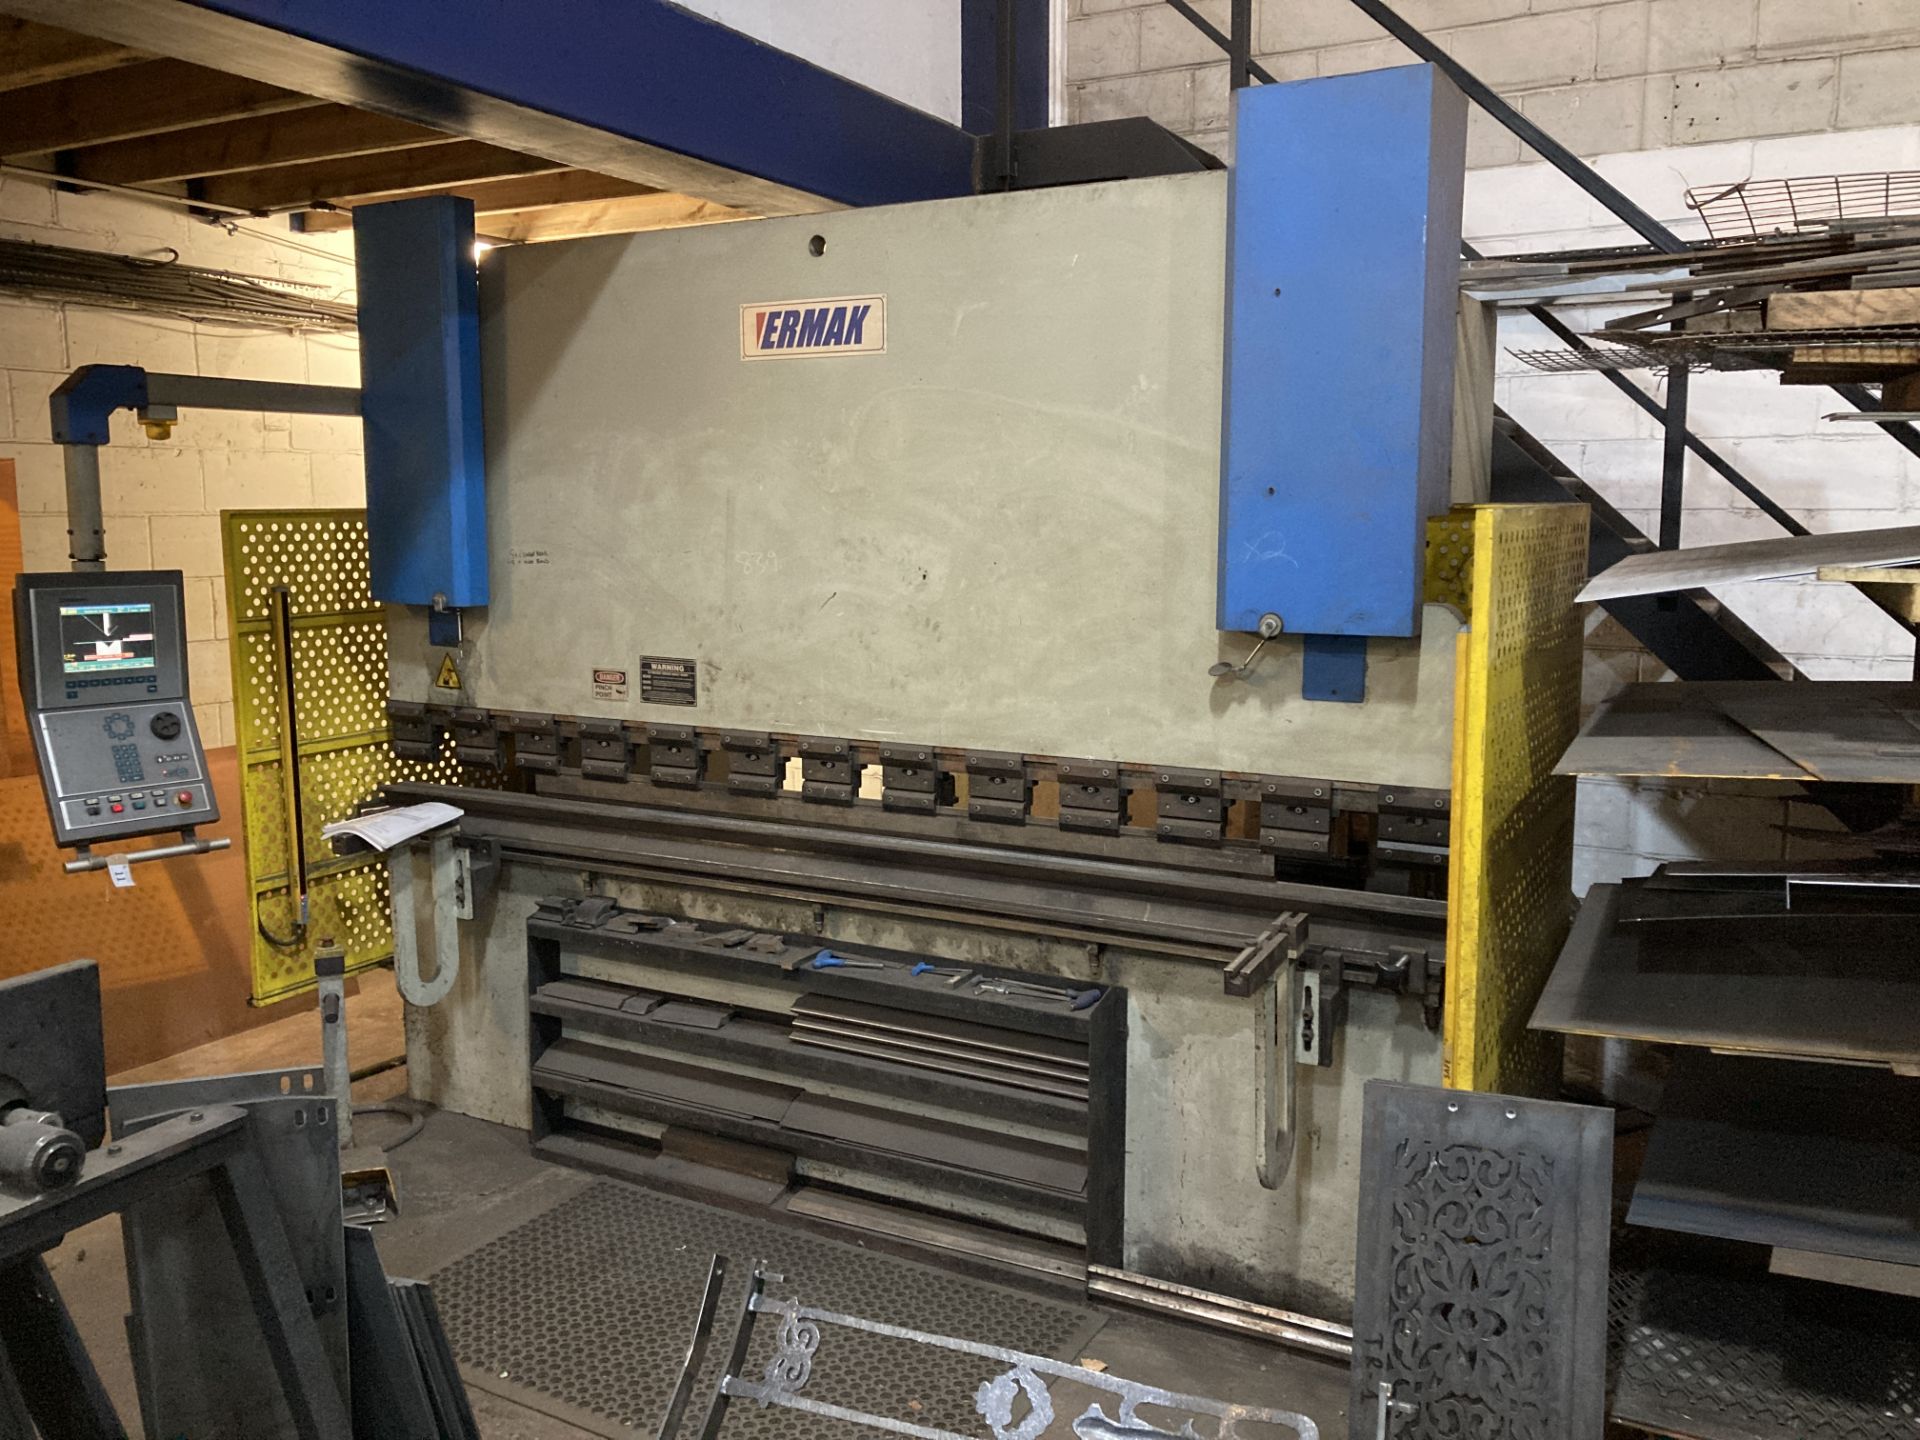 Ermaksan P3100-160 CNC press brake, capacity 160 tonne, year 2003, together with SafeEasy light